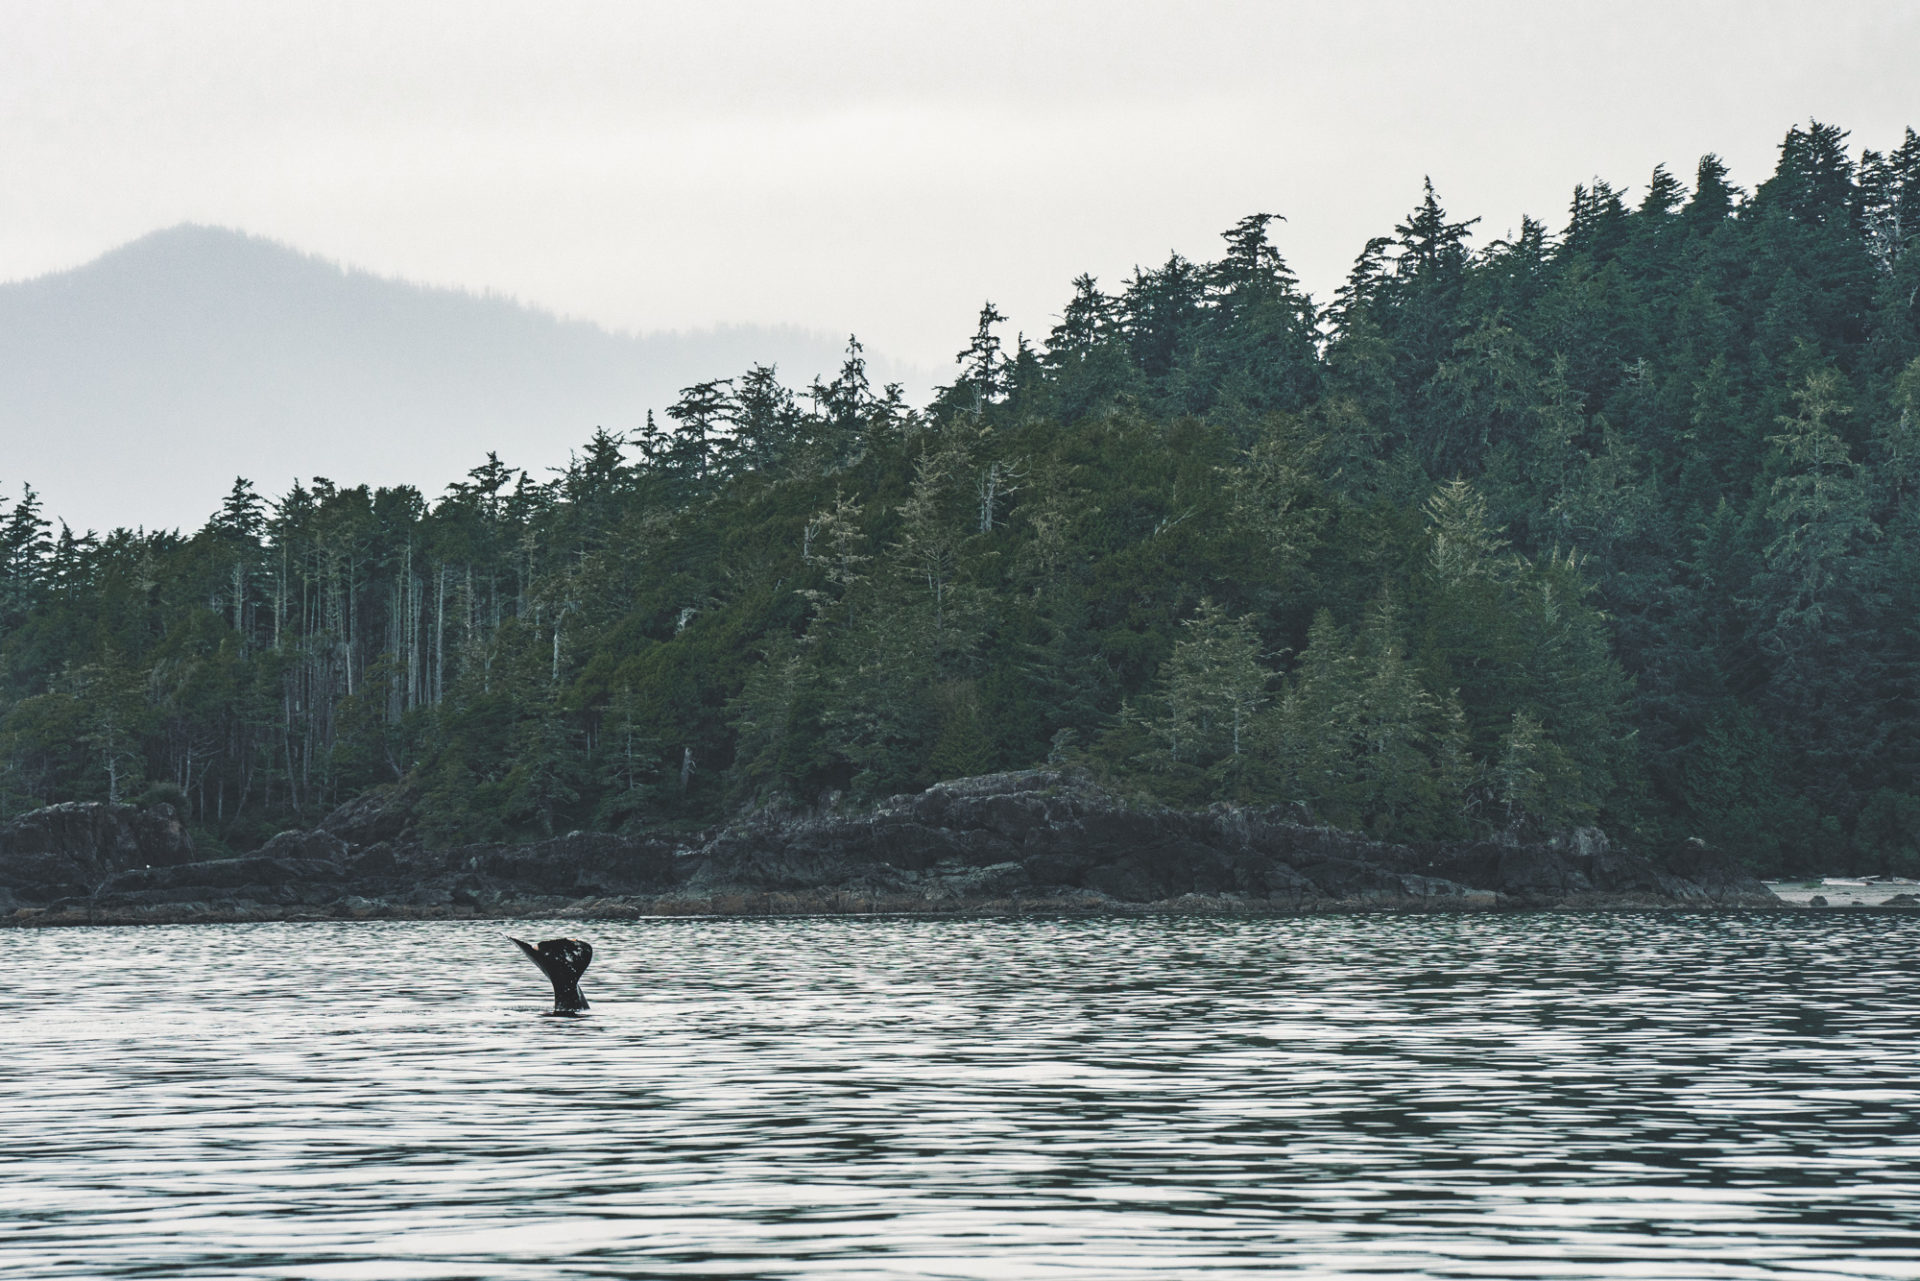 things to do in Tofino